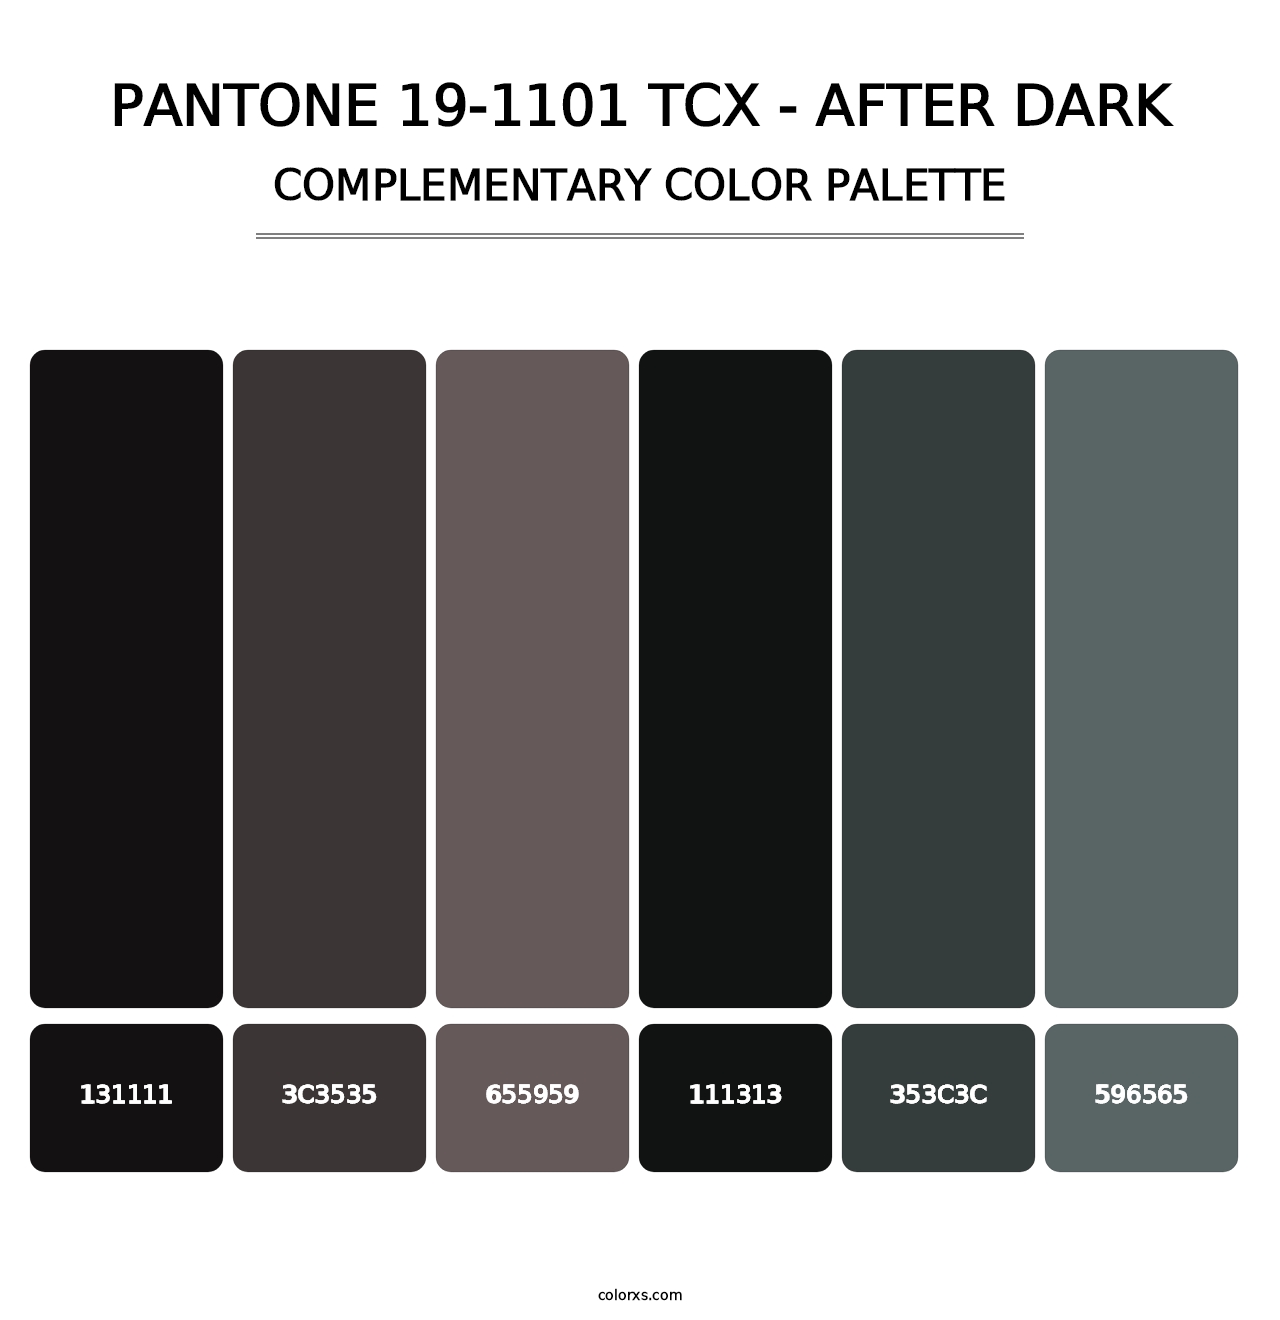 PANTONE 19-1101 TCX - After Dark - Complementary Color Palette